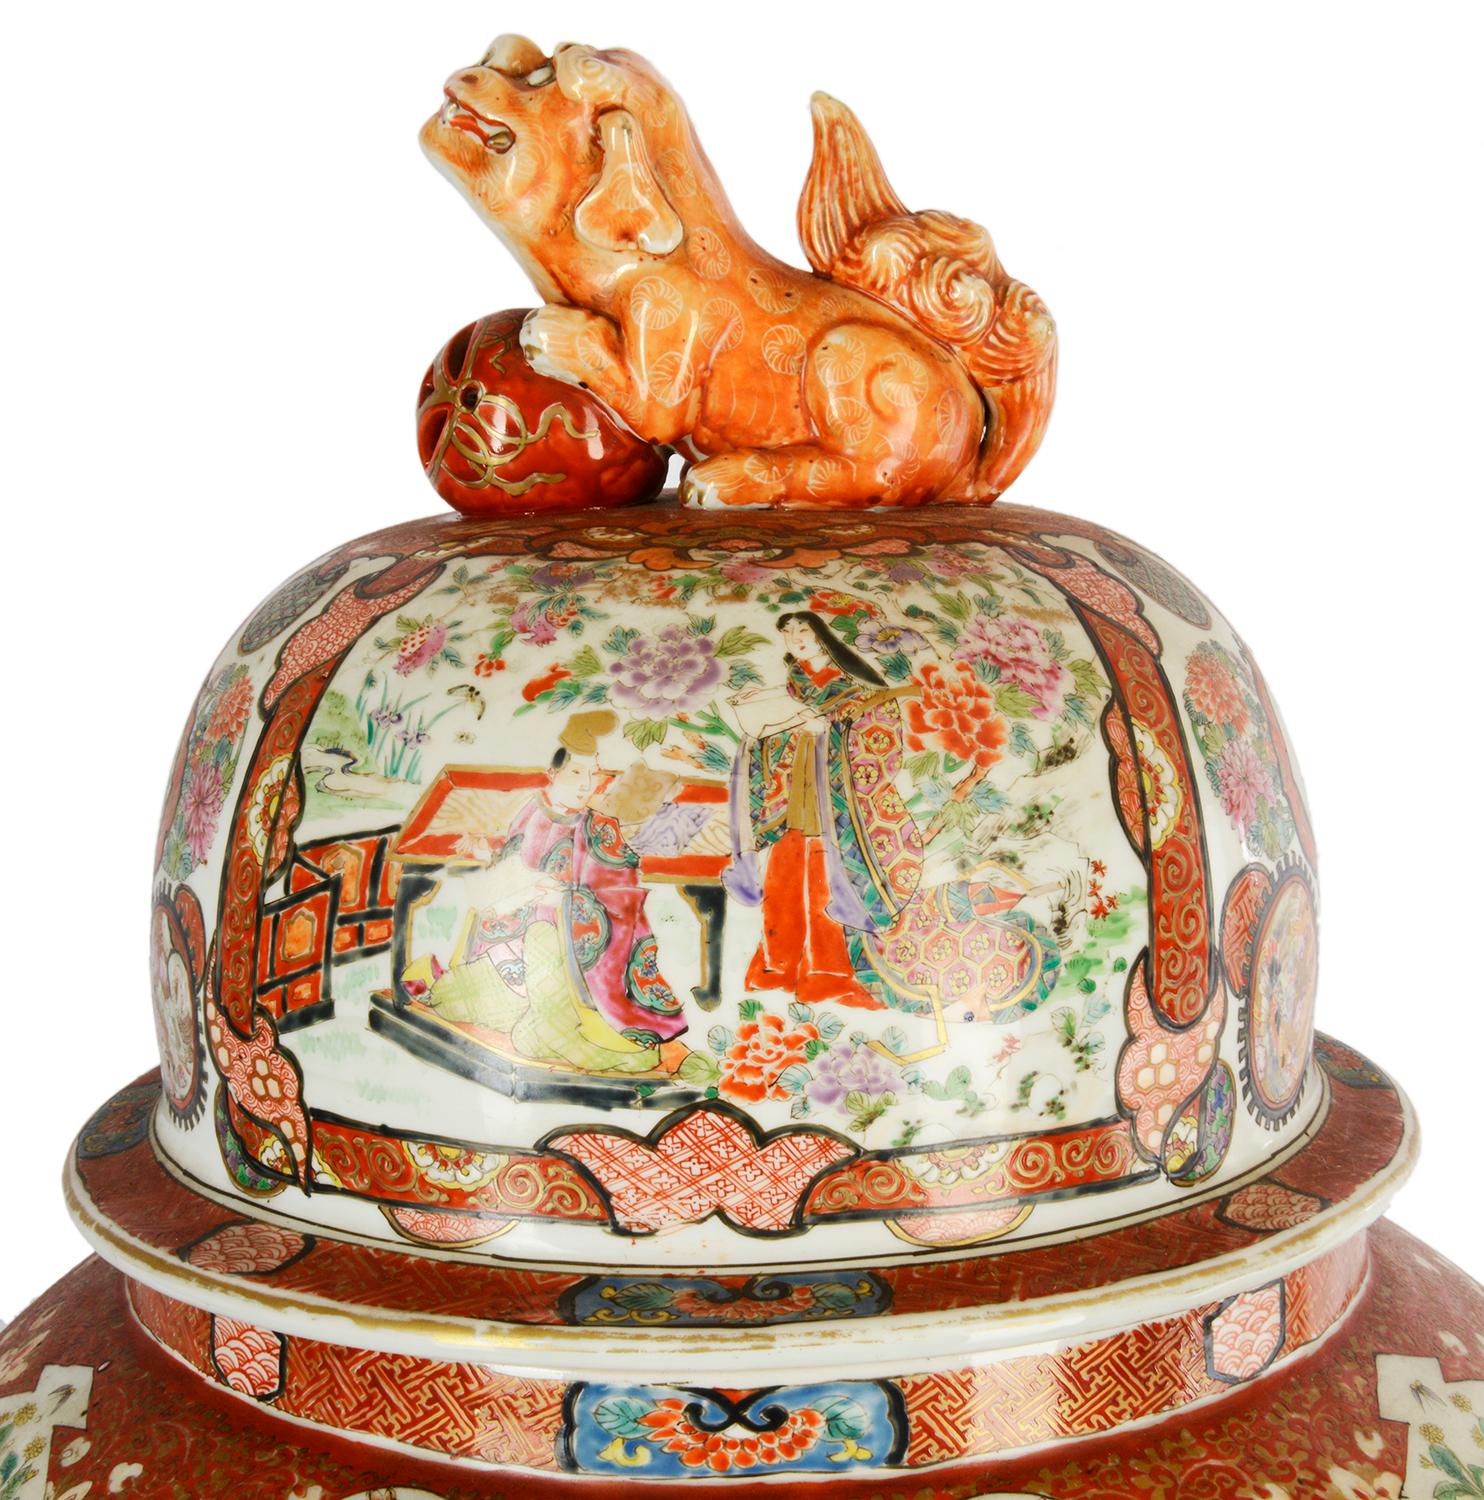 A very impressive large late 19th century Japanese lidded Kutani vase. Having a classical dog of faux with ball finial, painted scenes of scholars seated with scrolls, surrounded by attendants. The orange ground with classical motif and symbols, the